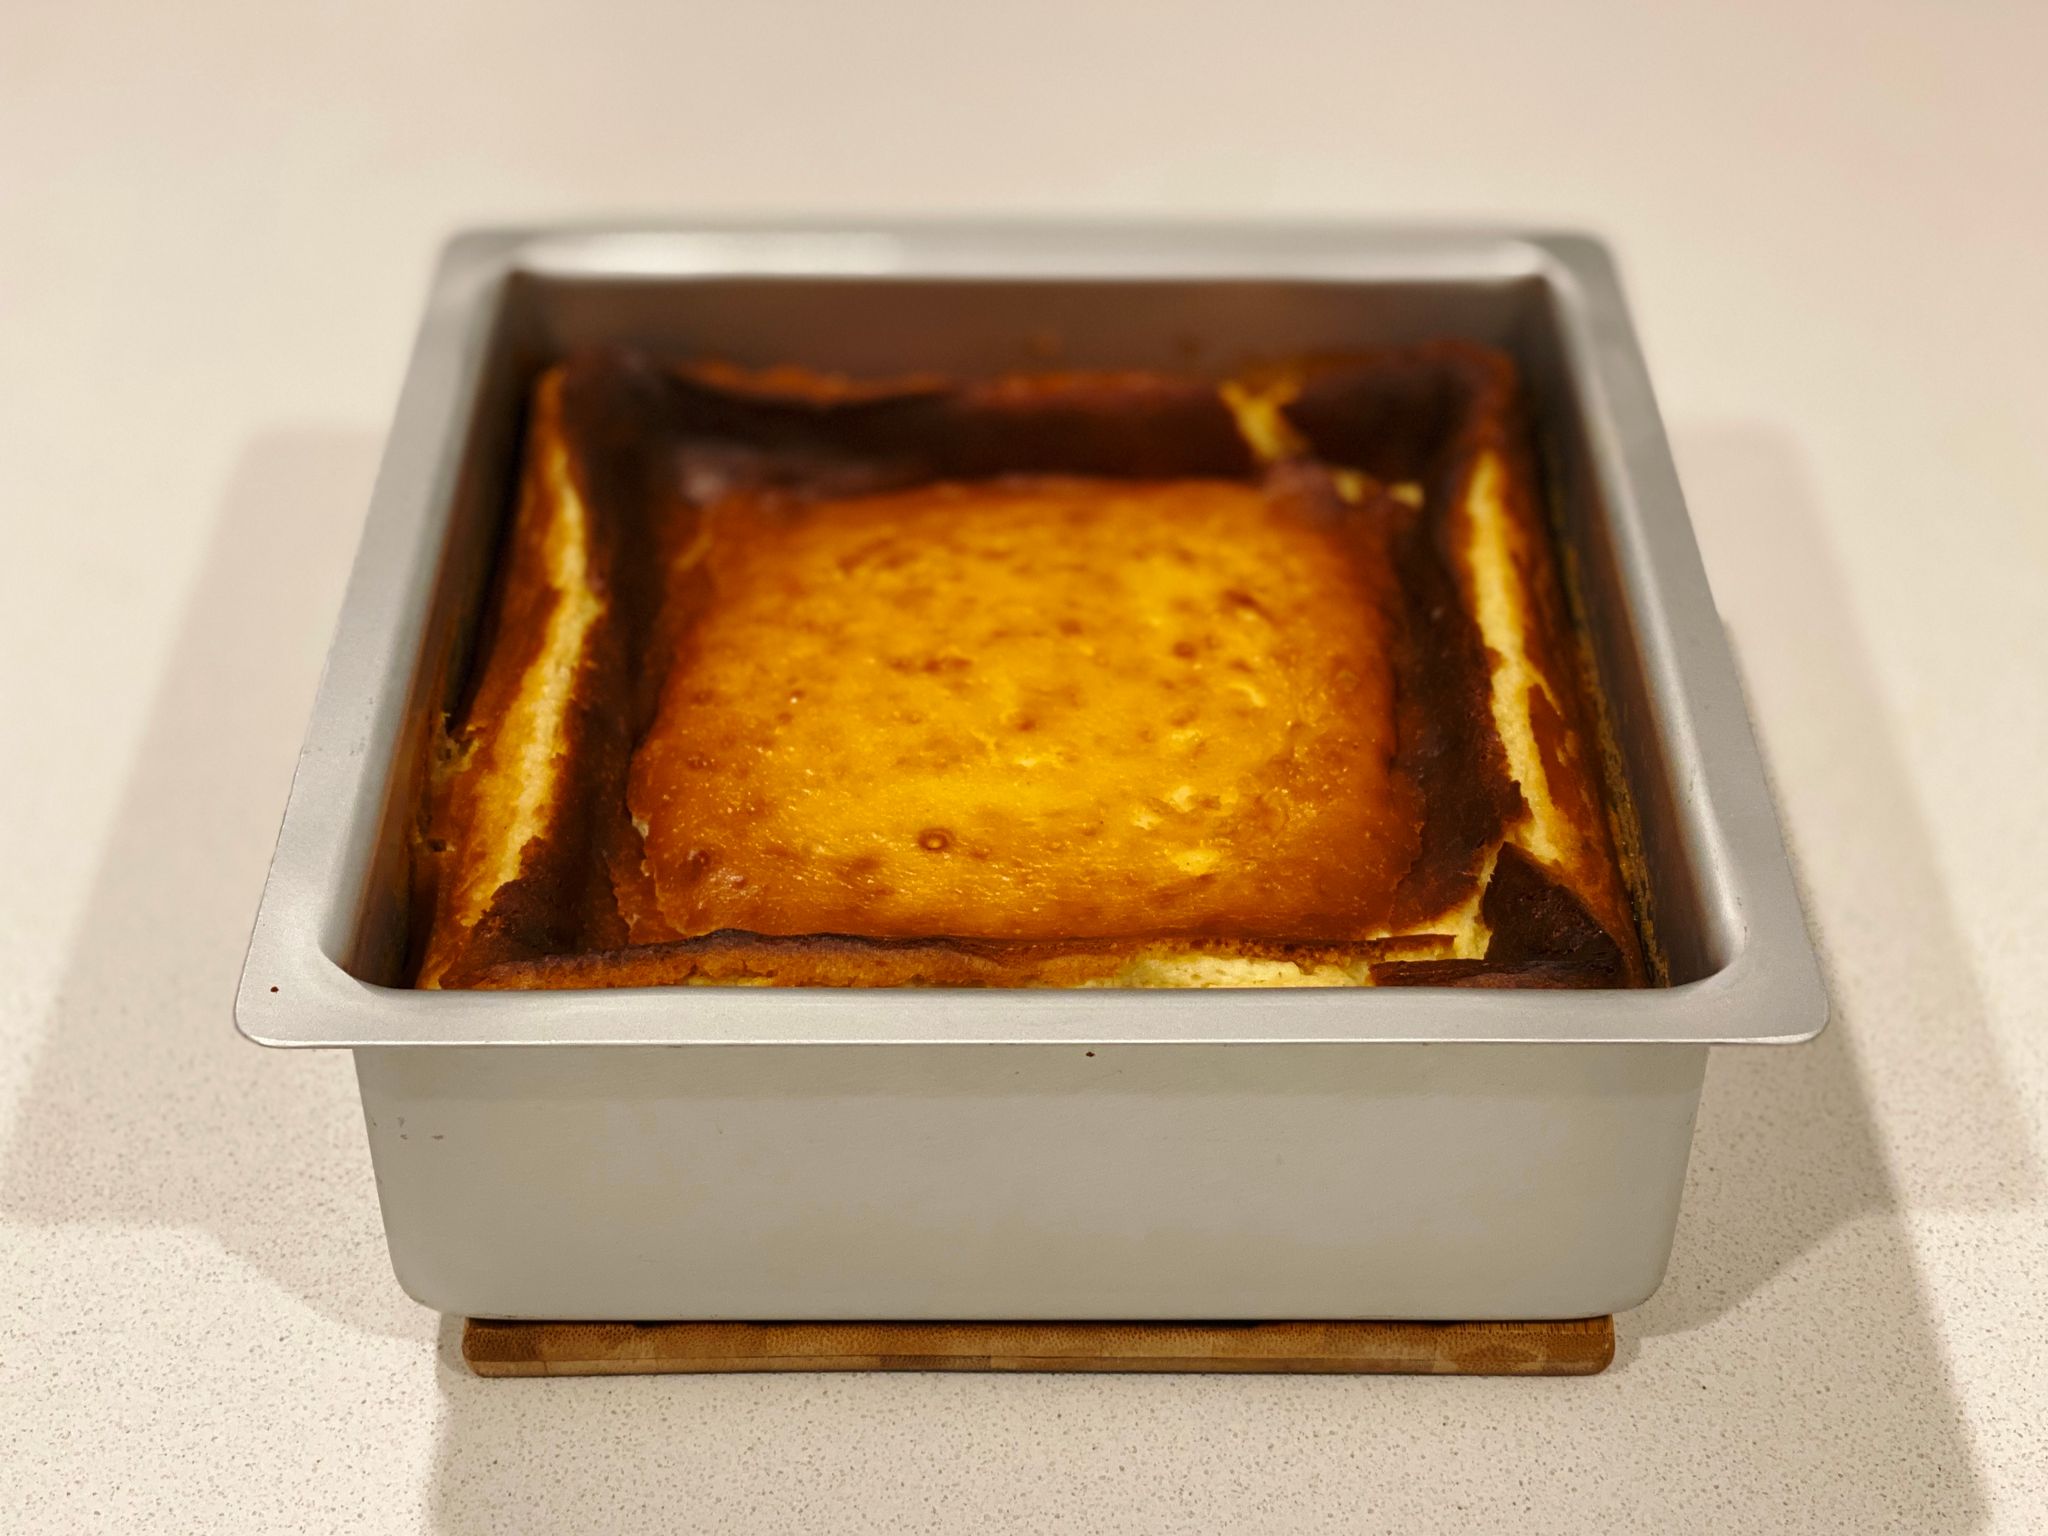 A photo of a tall square baking pan with quite brown-topped cheesecake in it. The edges are higher than the middle, and it looks slightly collapsed. Smells amazing though.